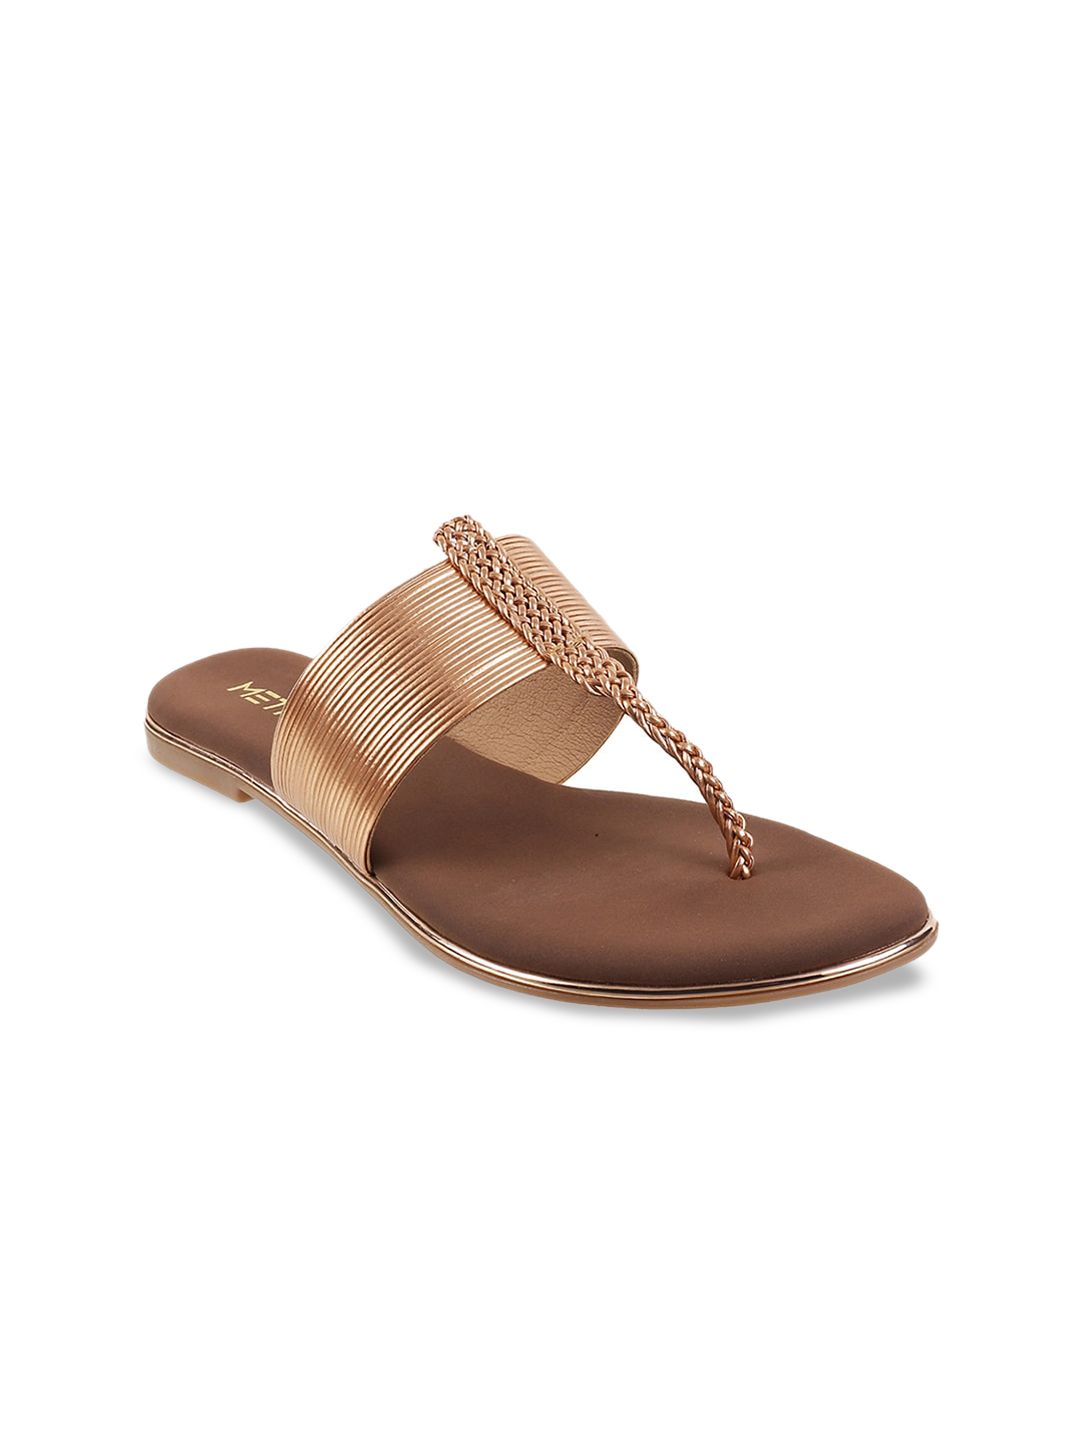 Metro Women Beige Embellished T-Strap Flats Price in India